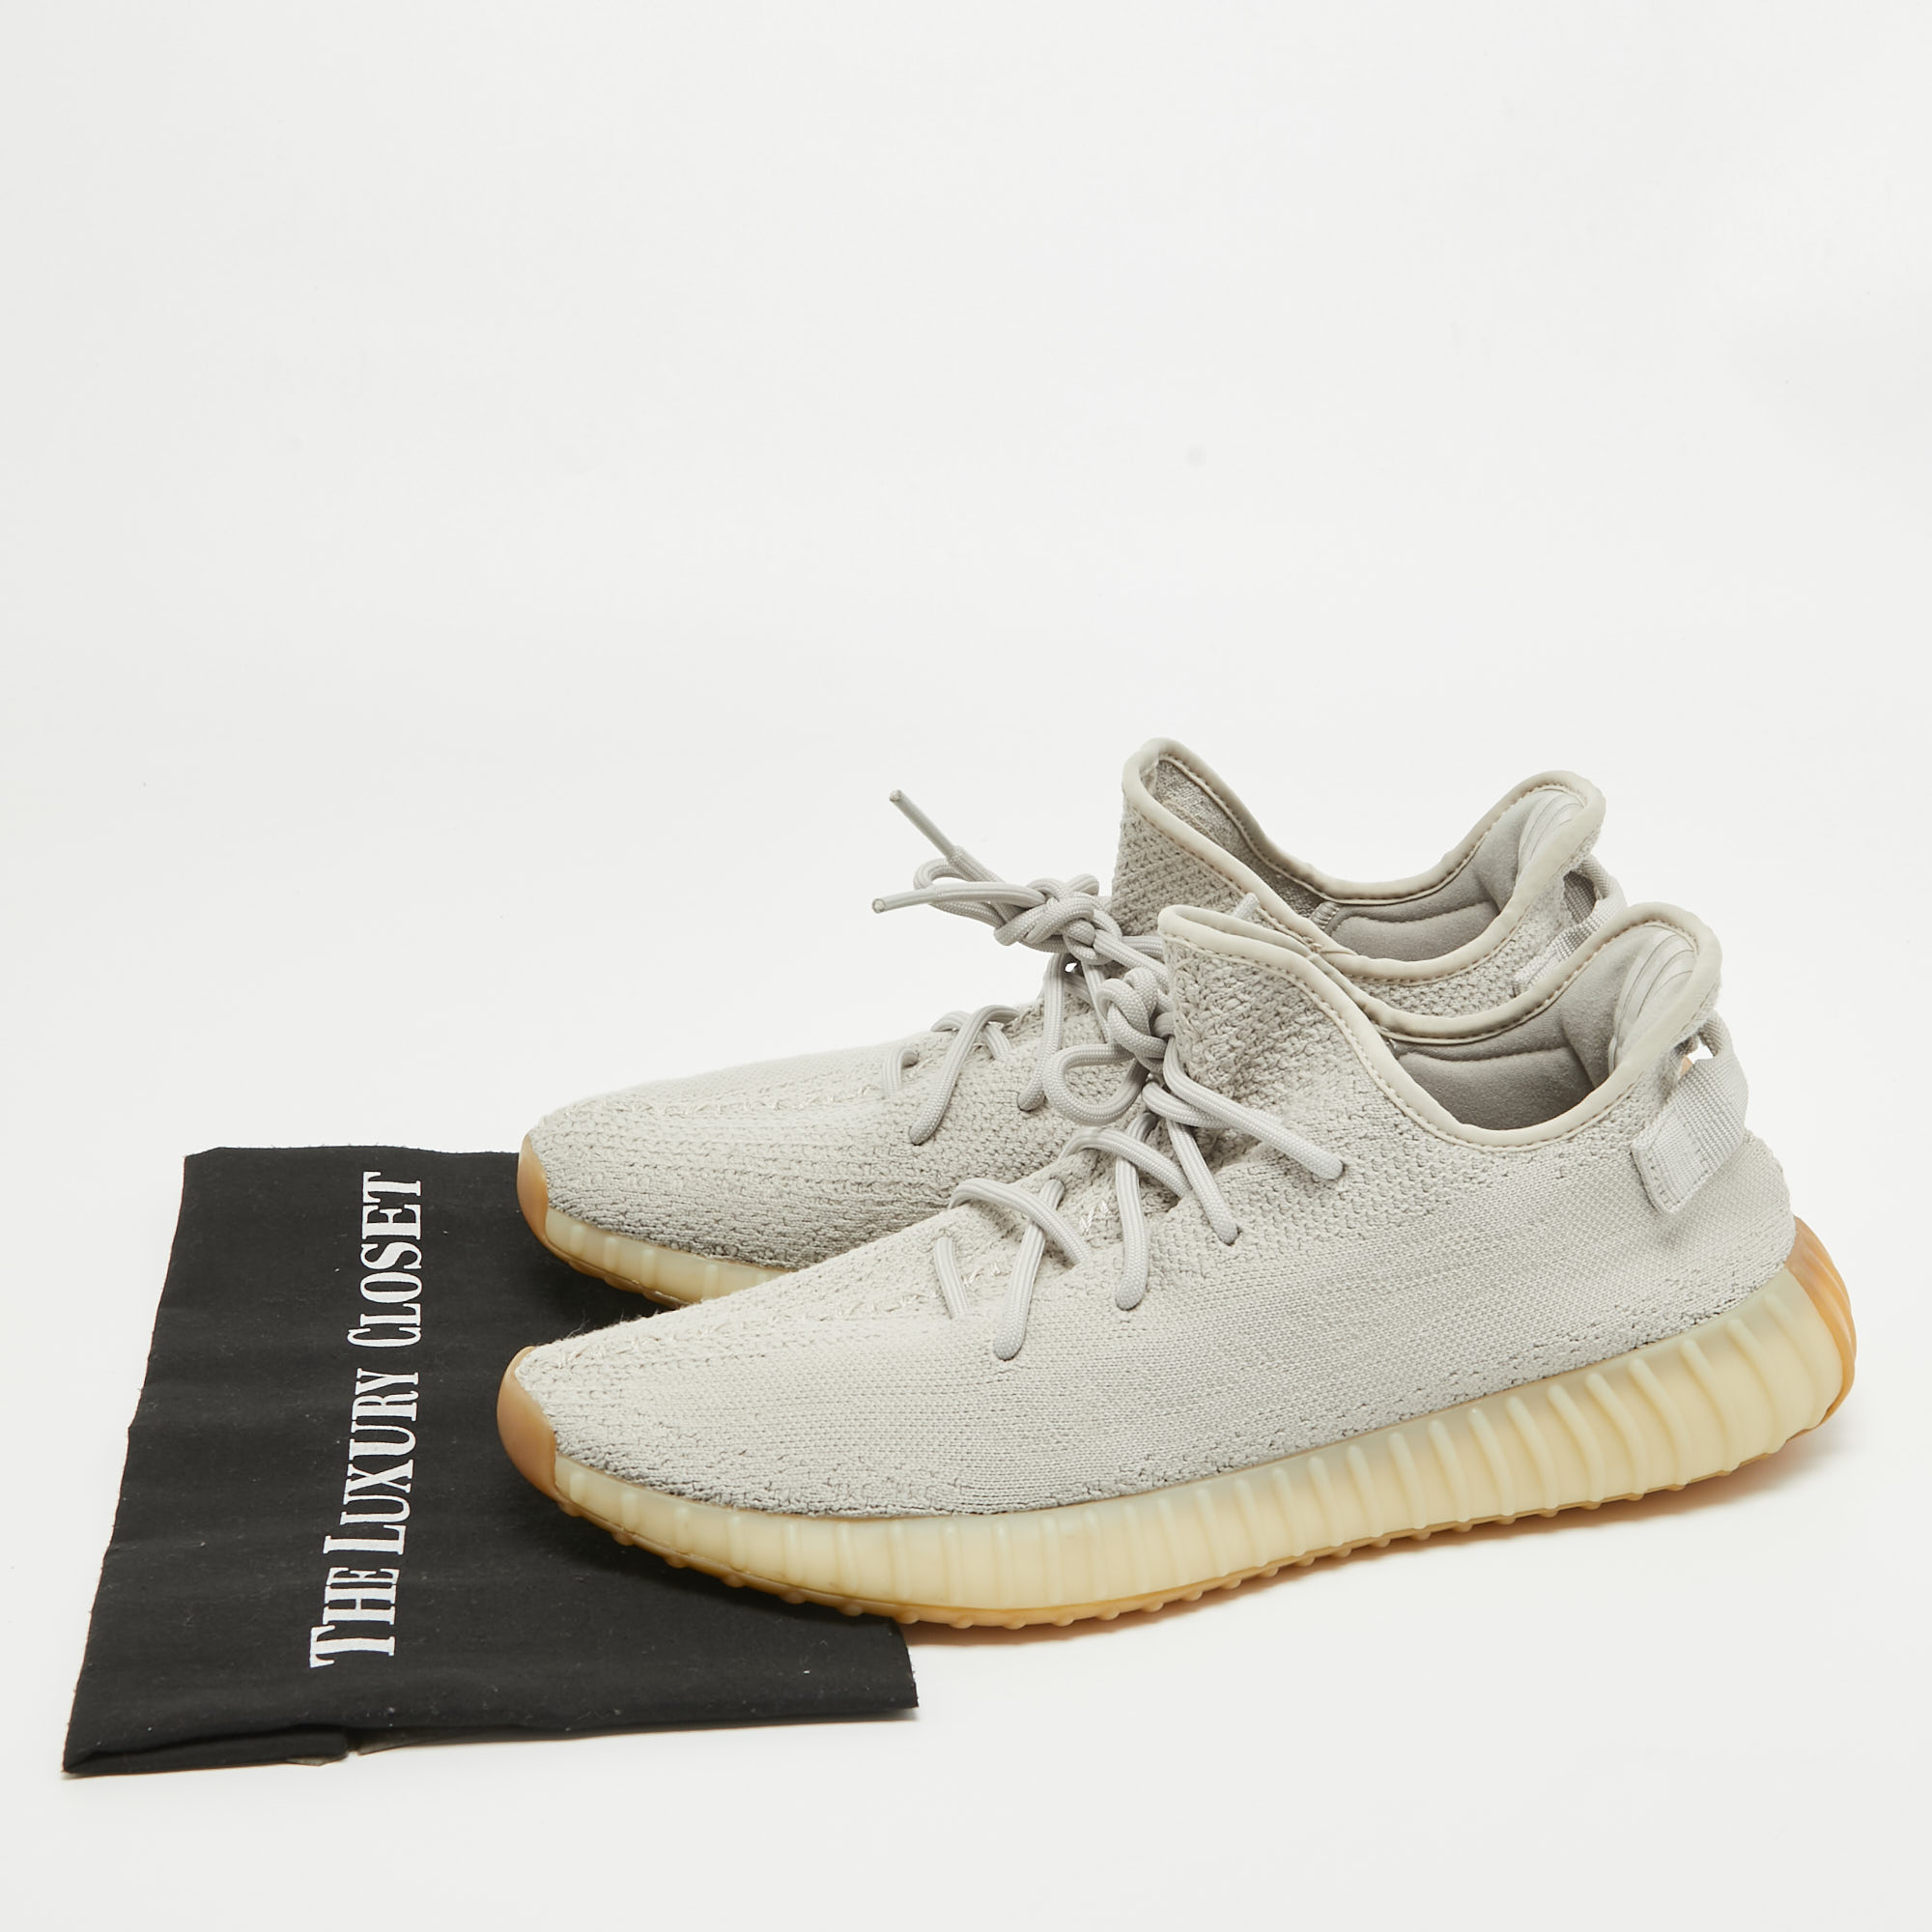 Yeezy X Adidas Grey Knit Fabric Boost 350 V2 Sesame Sneakers Size 46 2/3